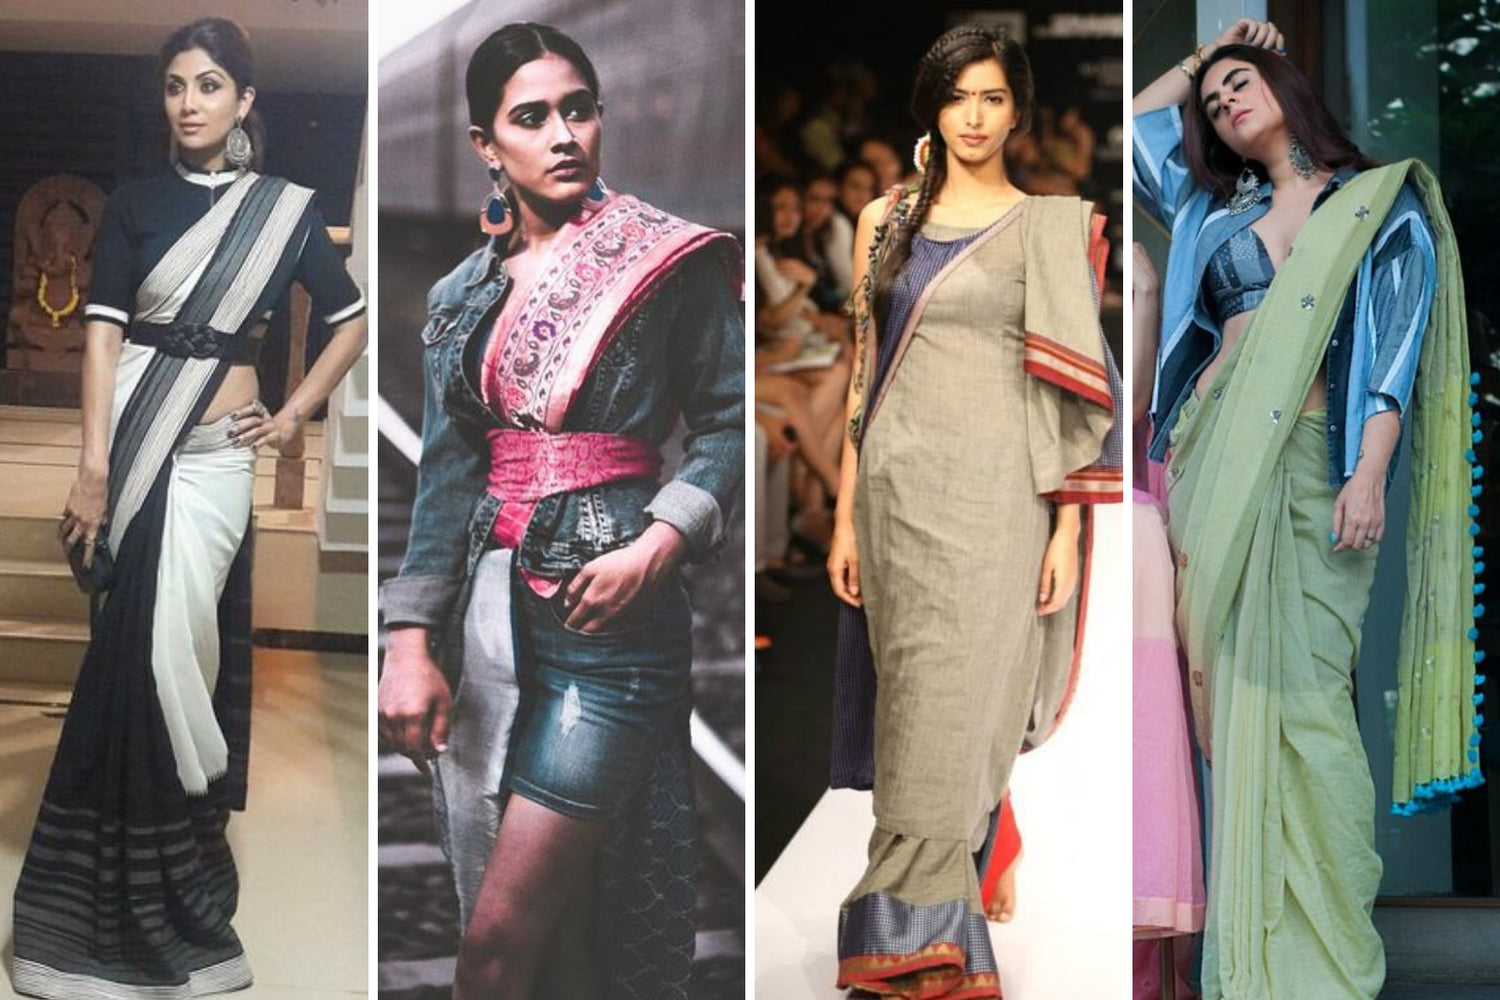 HOW TO WEAR SAREE IN MODERN STYLE: 8 AMAZING WAYS